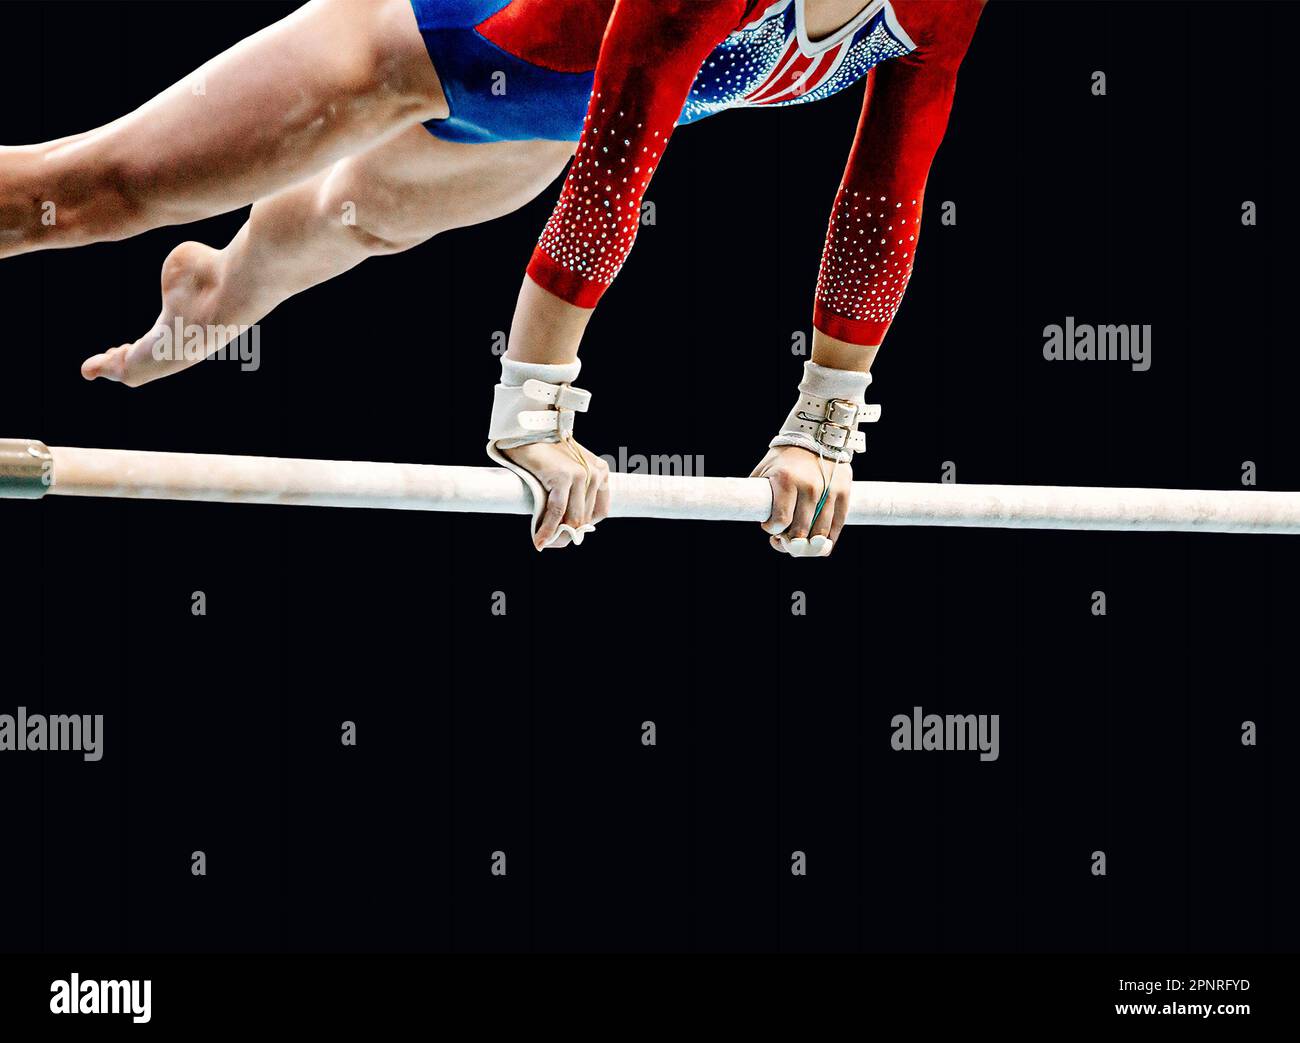 close-up female gymnast exercise on uneven bars in artistic gymnastics, black background, sports summer games Stock Photo